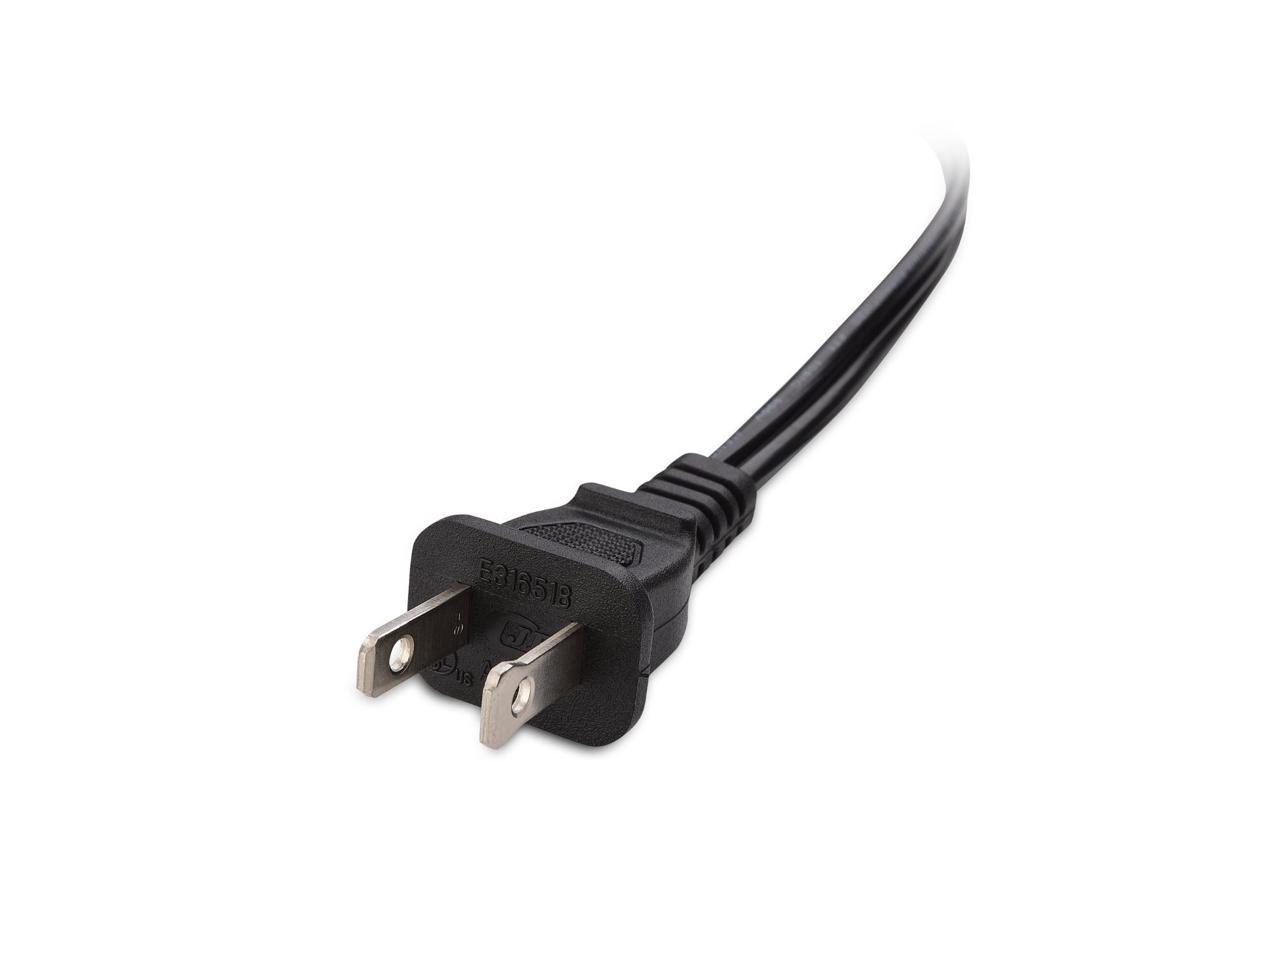 OMNIHIL AC Power Cord Cable Compatible with Taotaole Home Theater Projector OMNI0915170019 